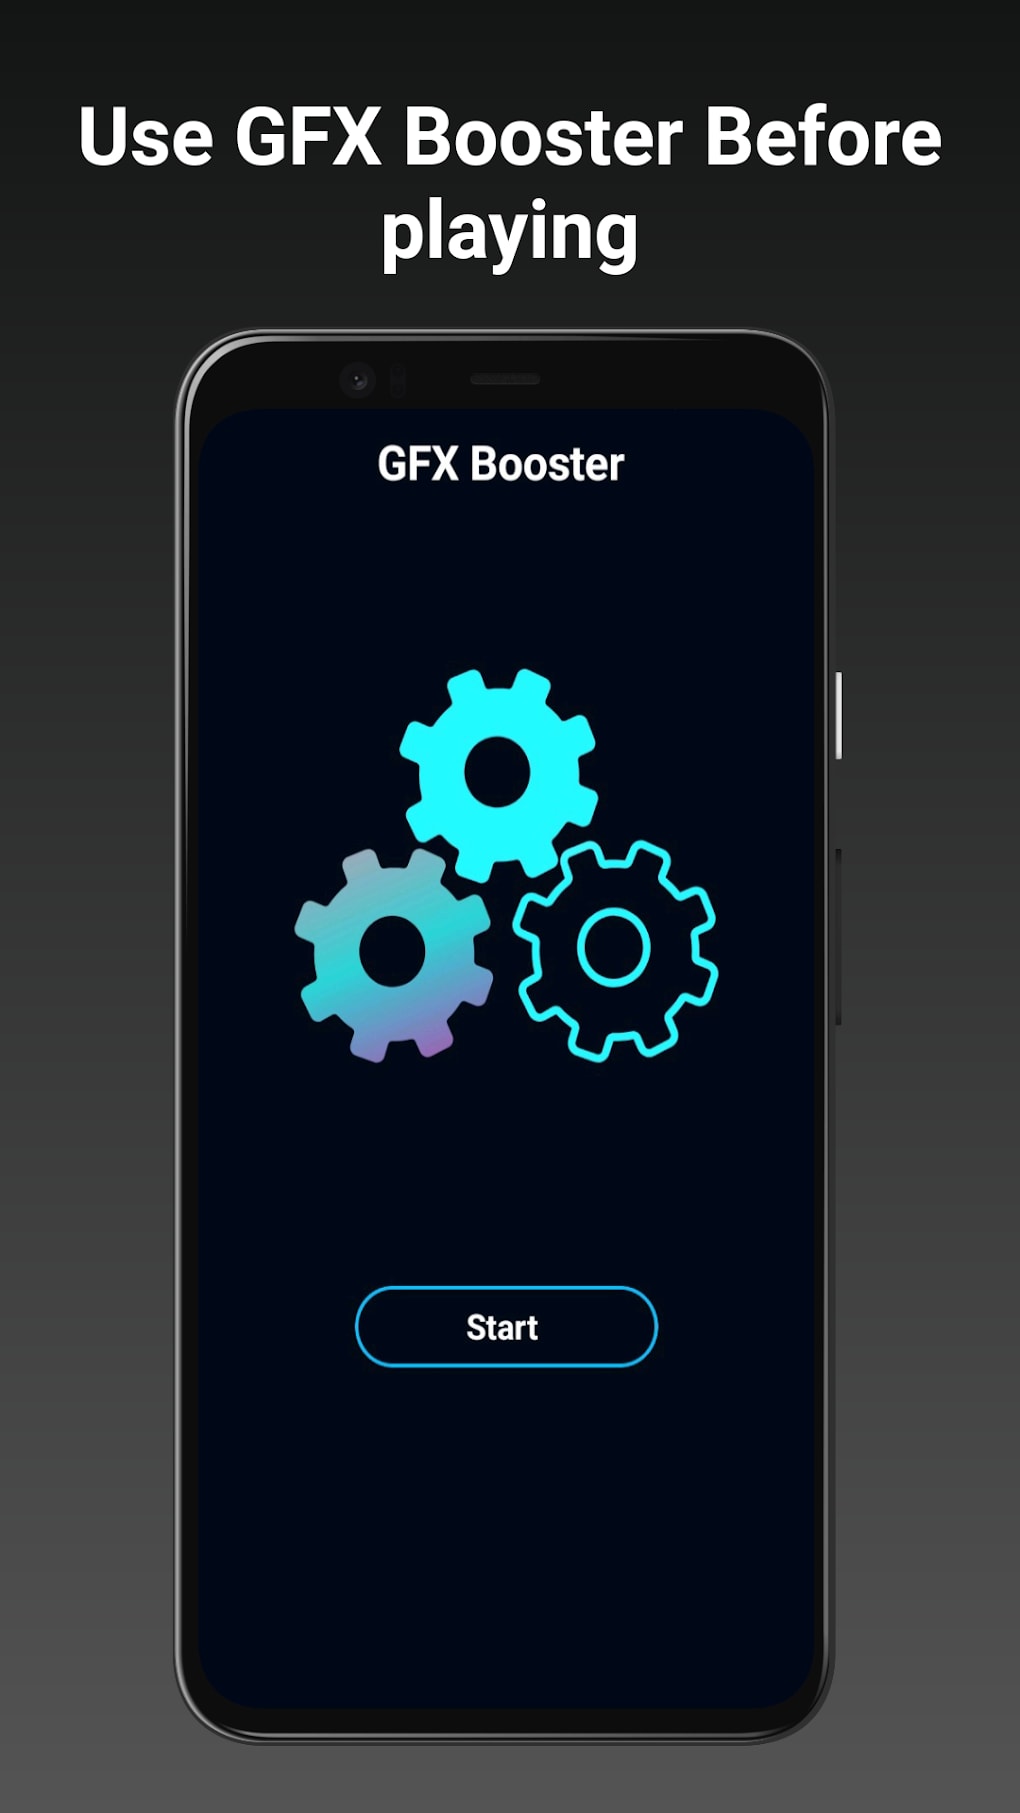 Gfx Tool for Roblox APK (Android App) - Free Download